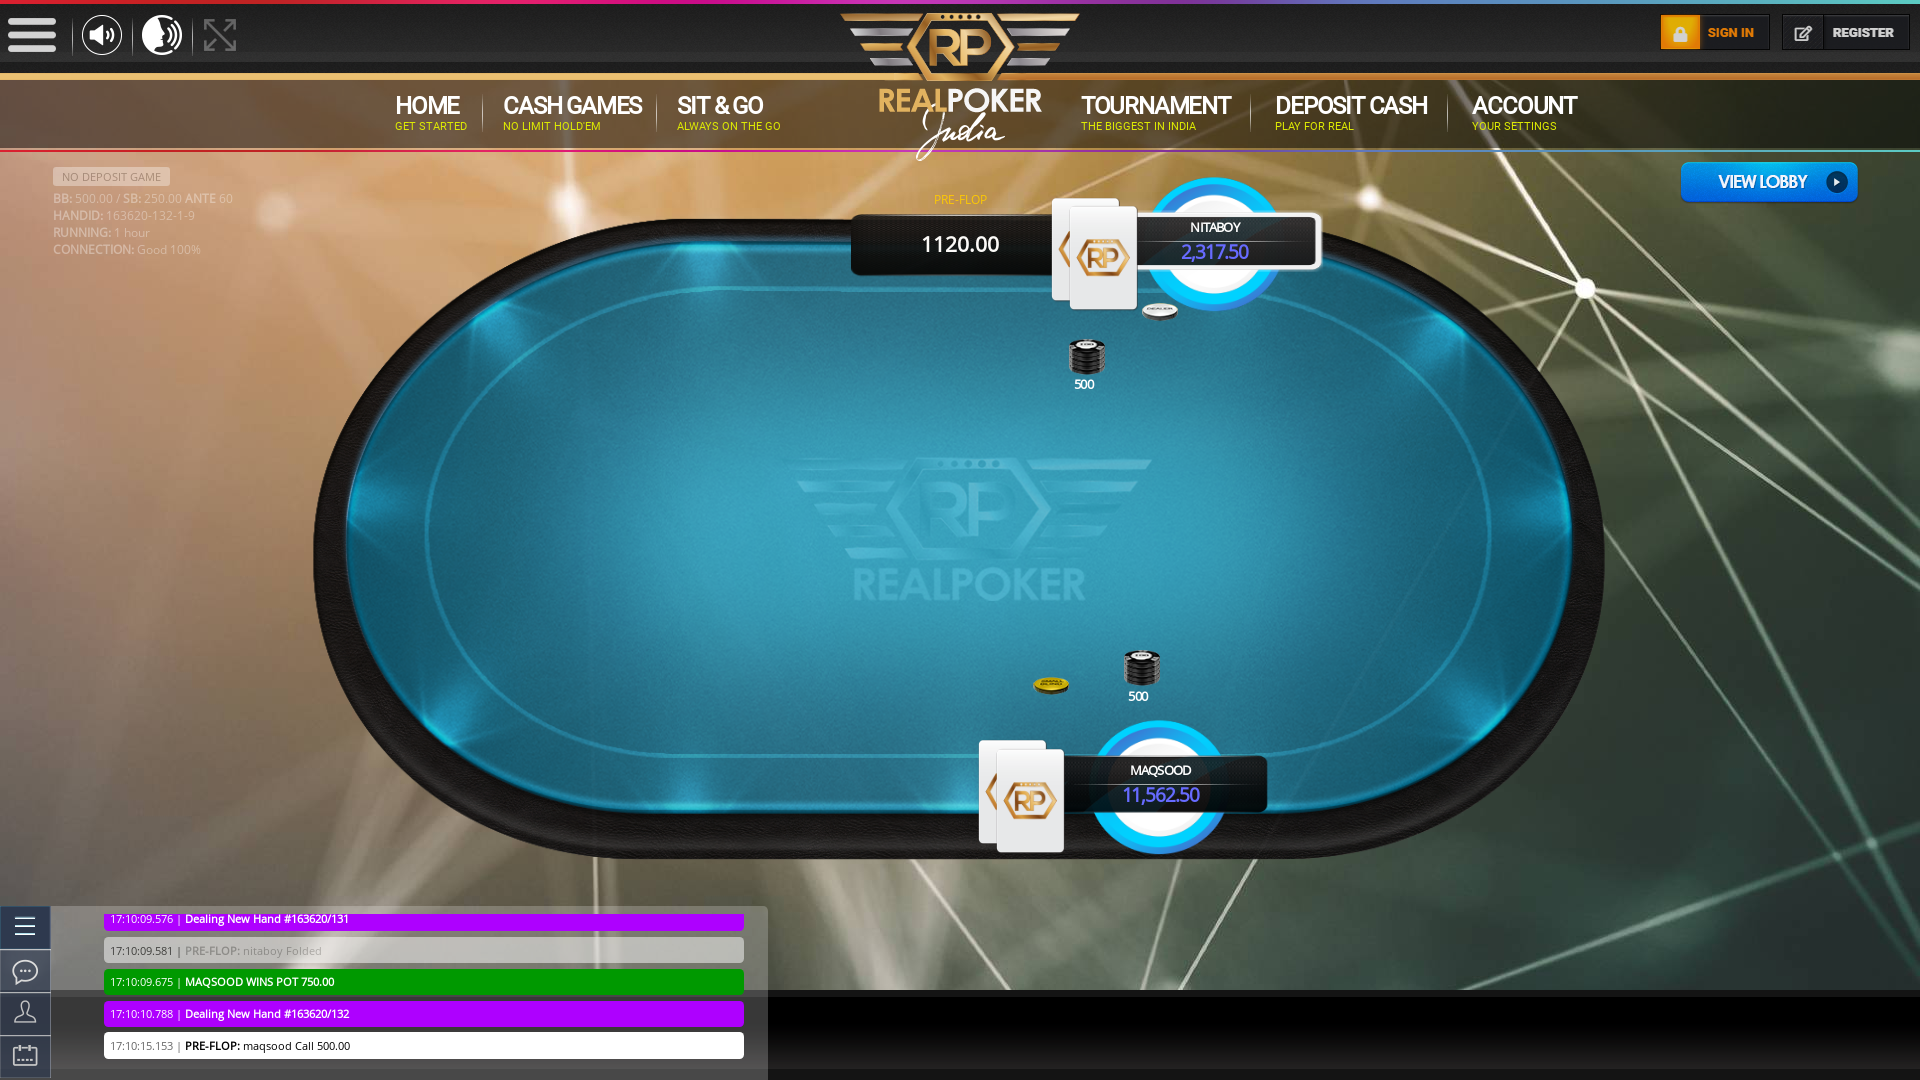 Real poker 10 player table in the 66th minute of the match